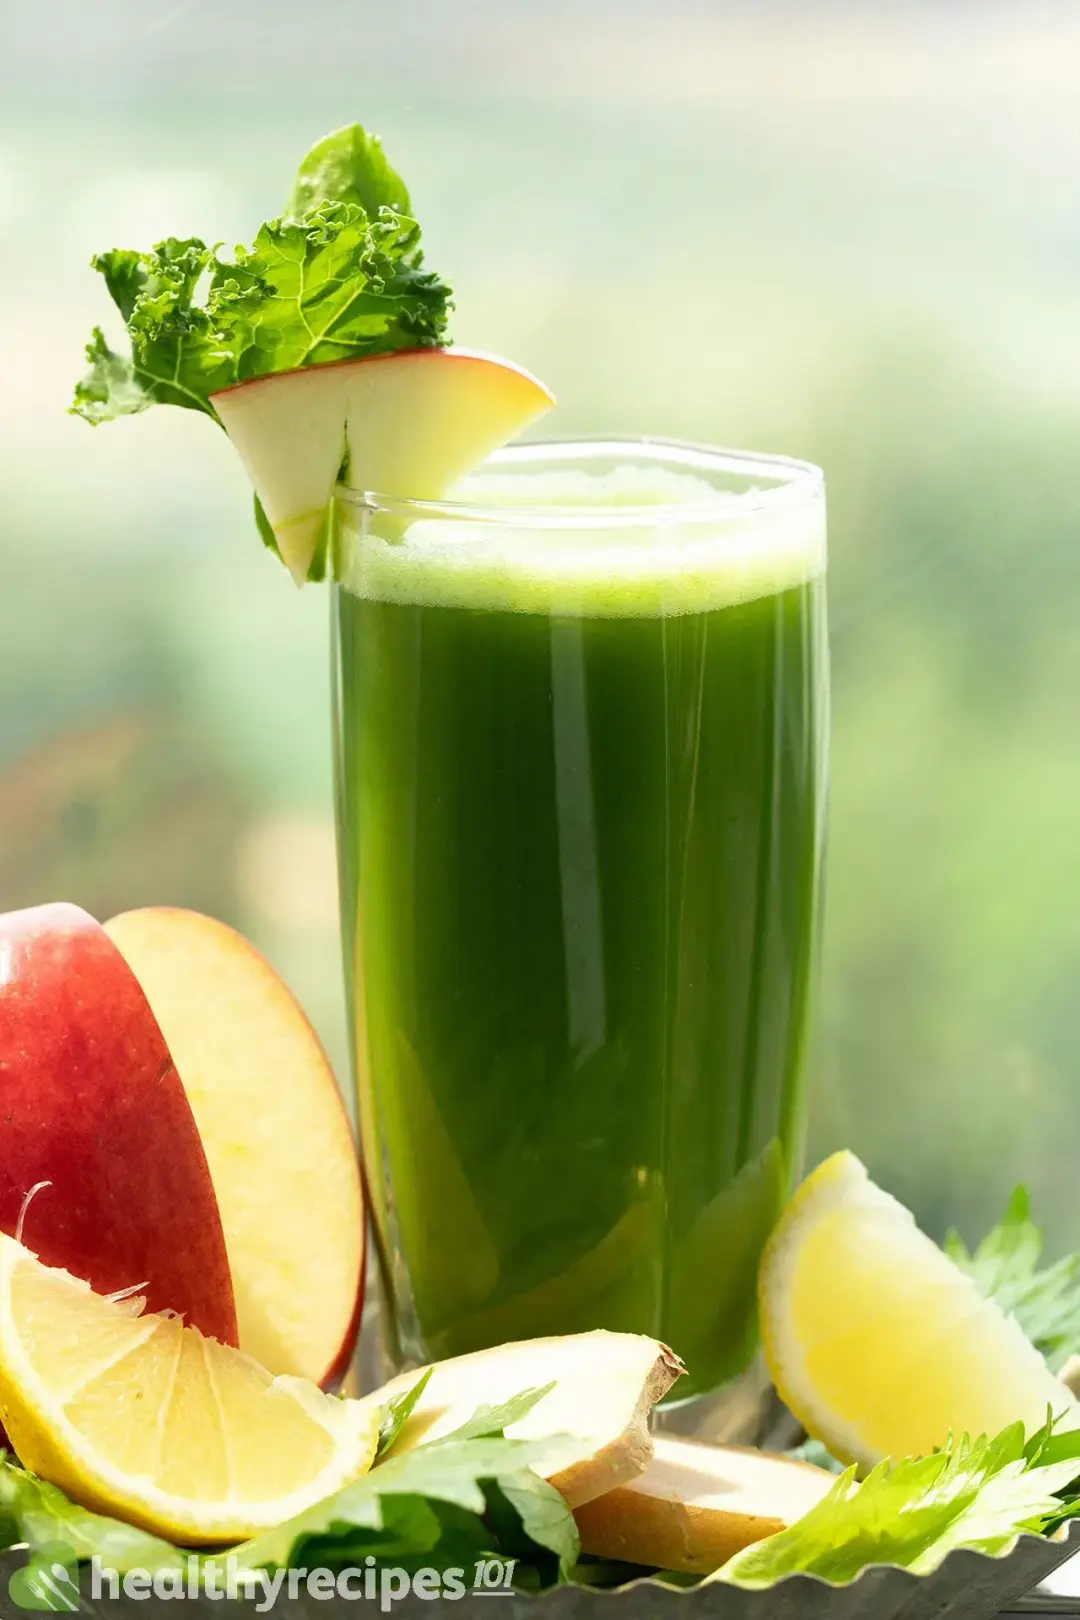 A glass of mean green juice put next to an apple and lemon wedges, taken outdoor